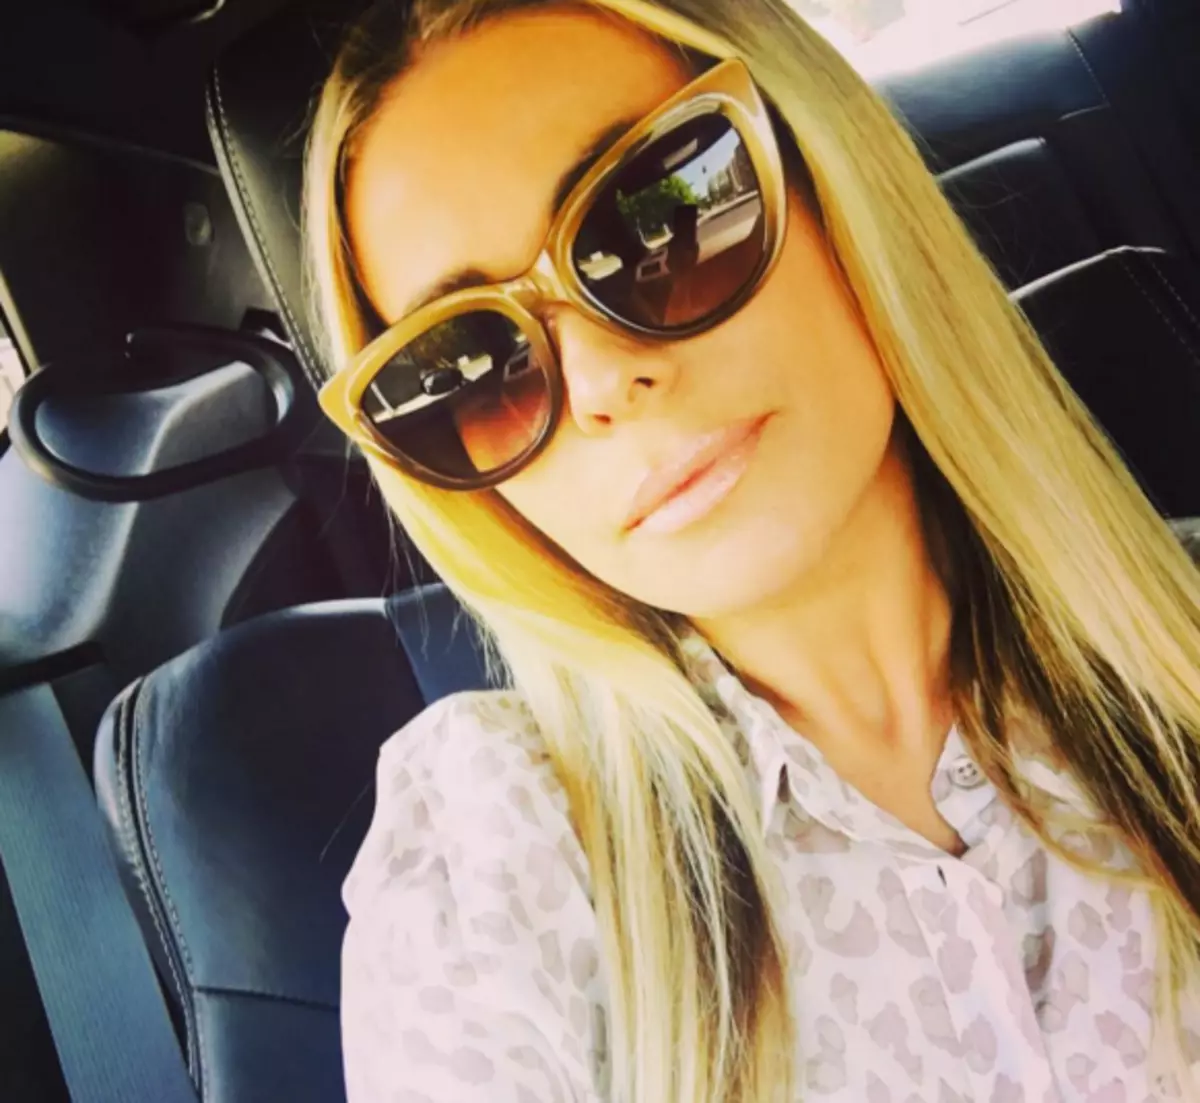 Carmen Electra divorced with her husband a week after the wedding